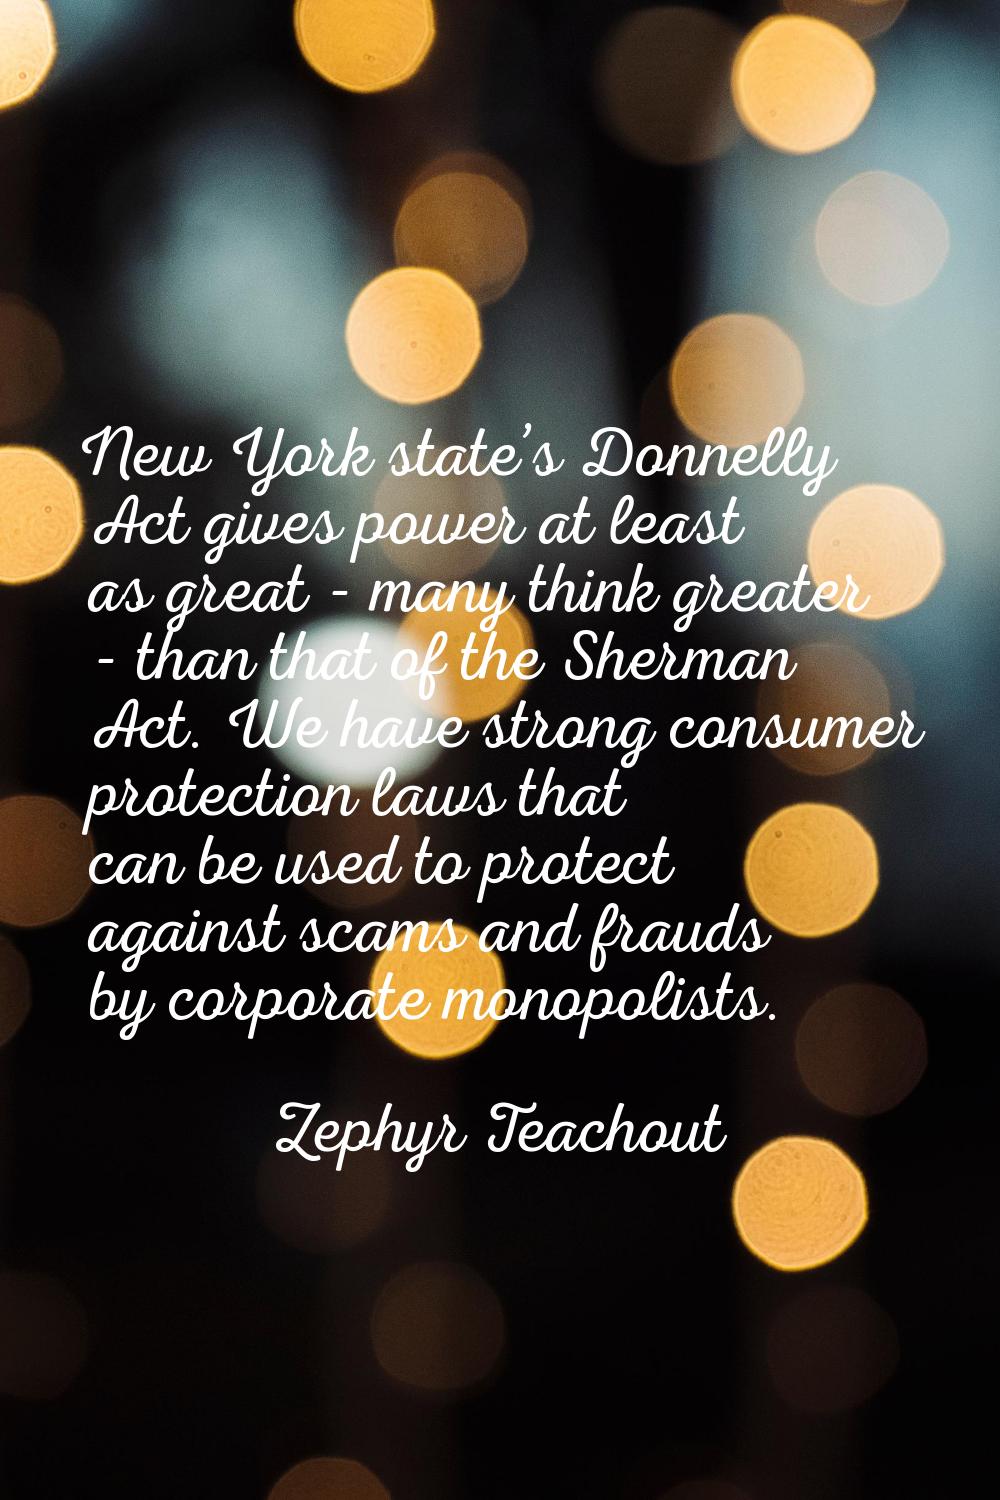 New York state’s Donnelly Act gives power at least as great - many think greater - than that of the